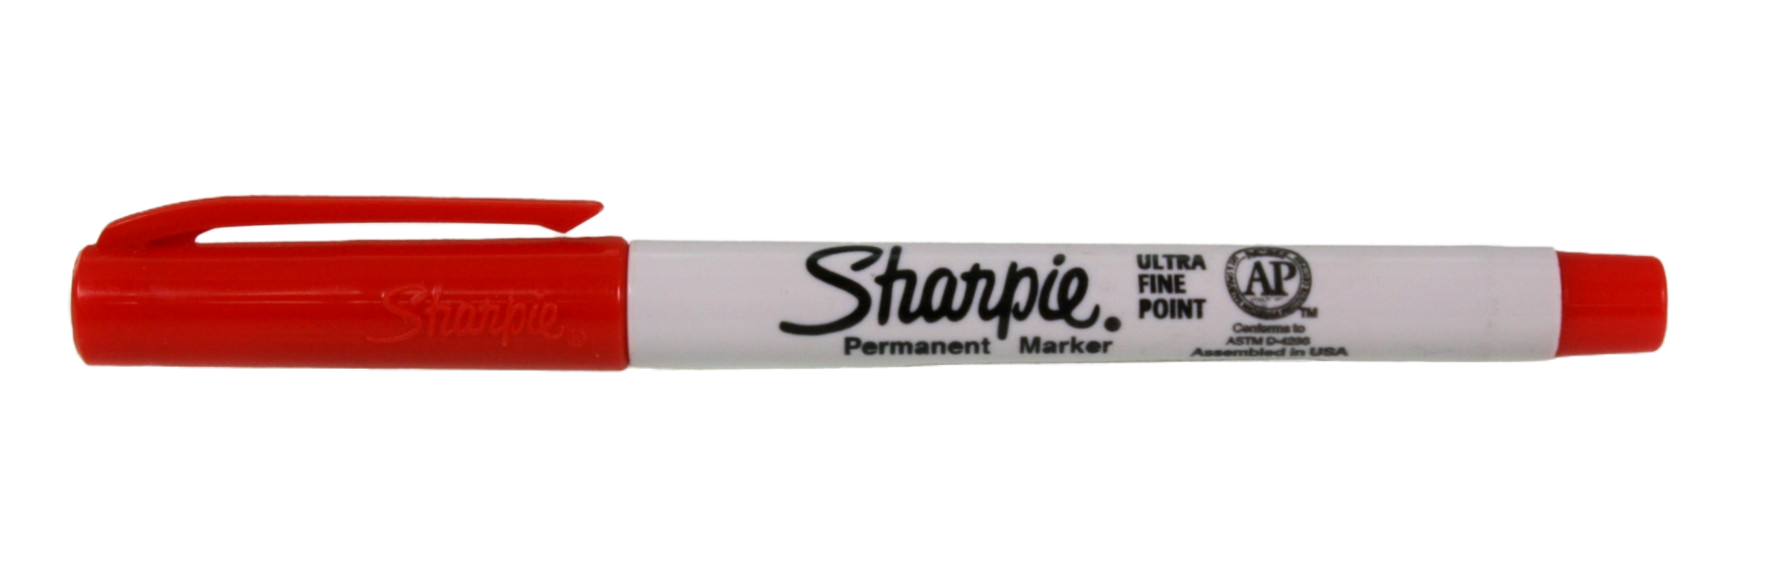 Sharpie Ultra Fine Point, red, lid on